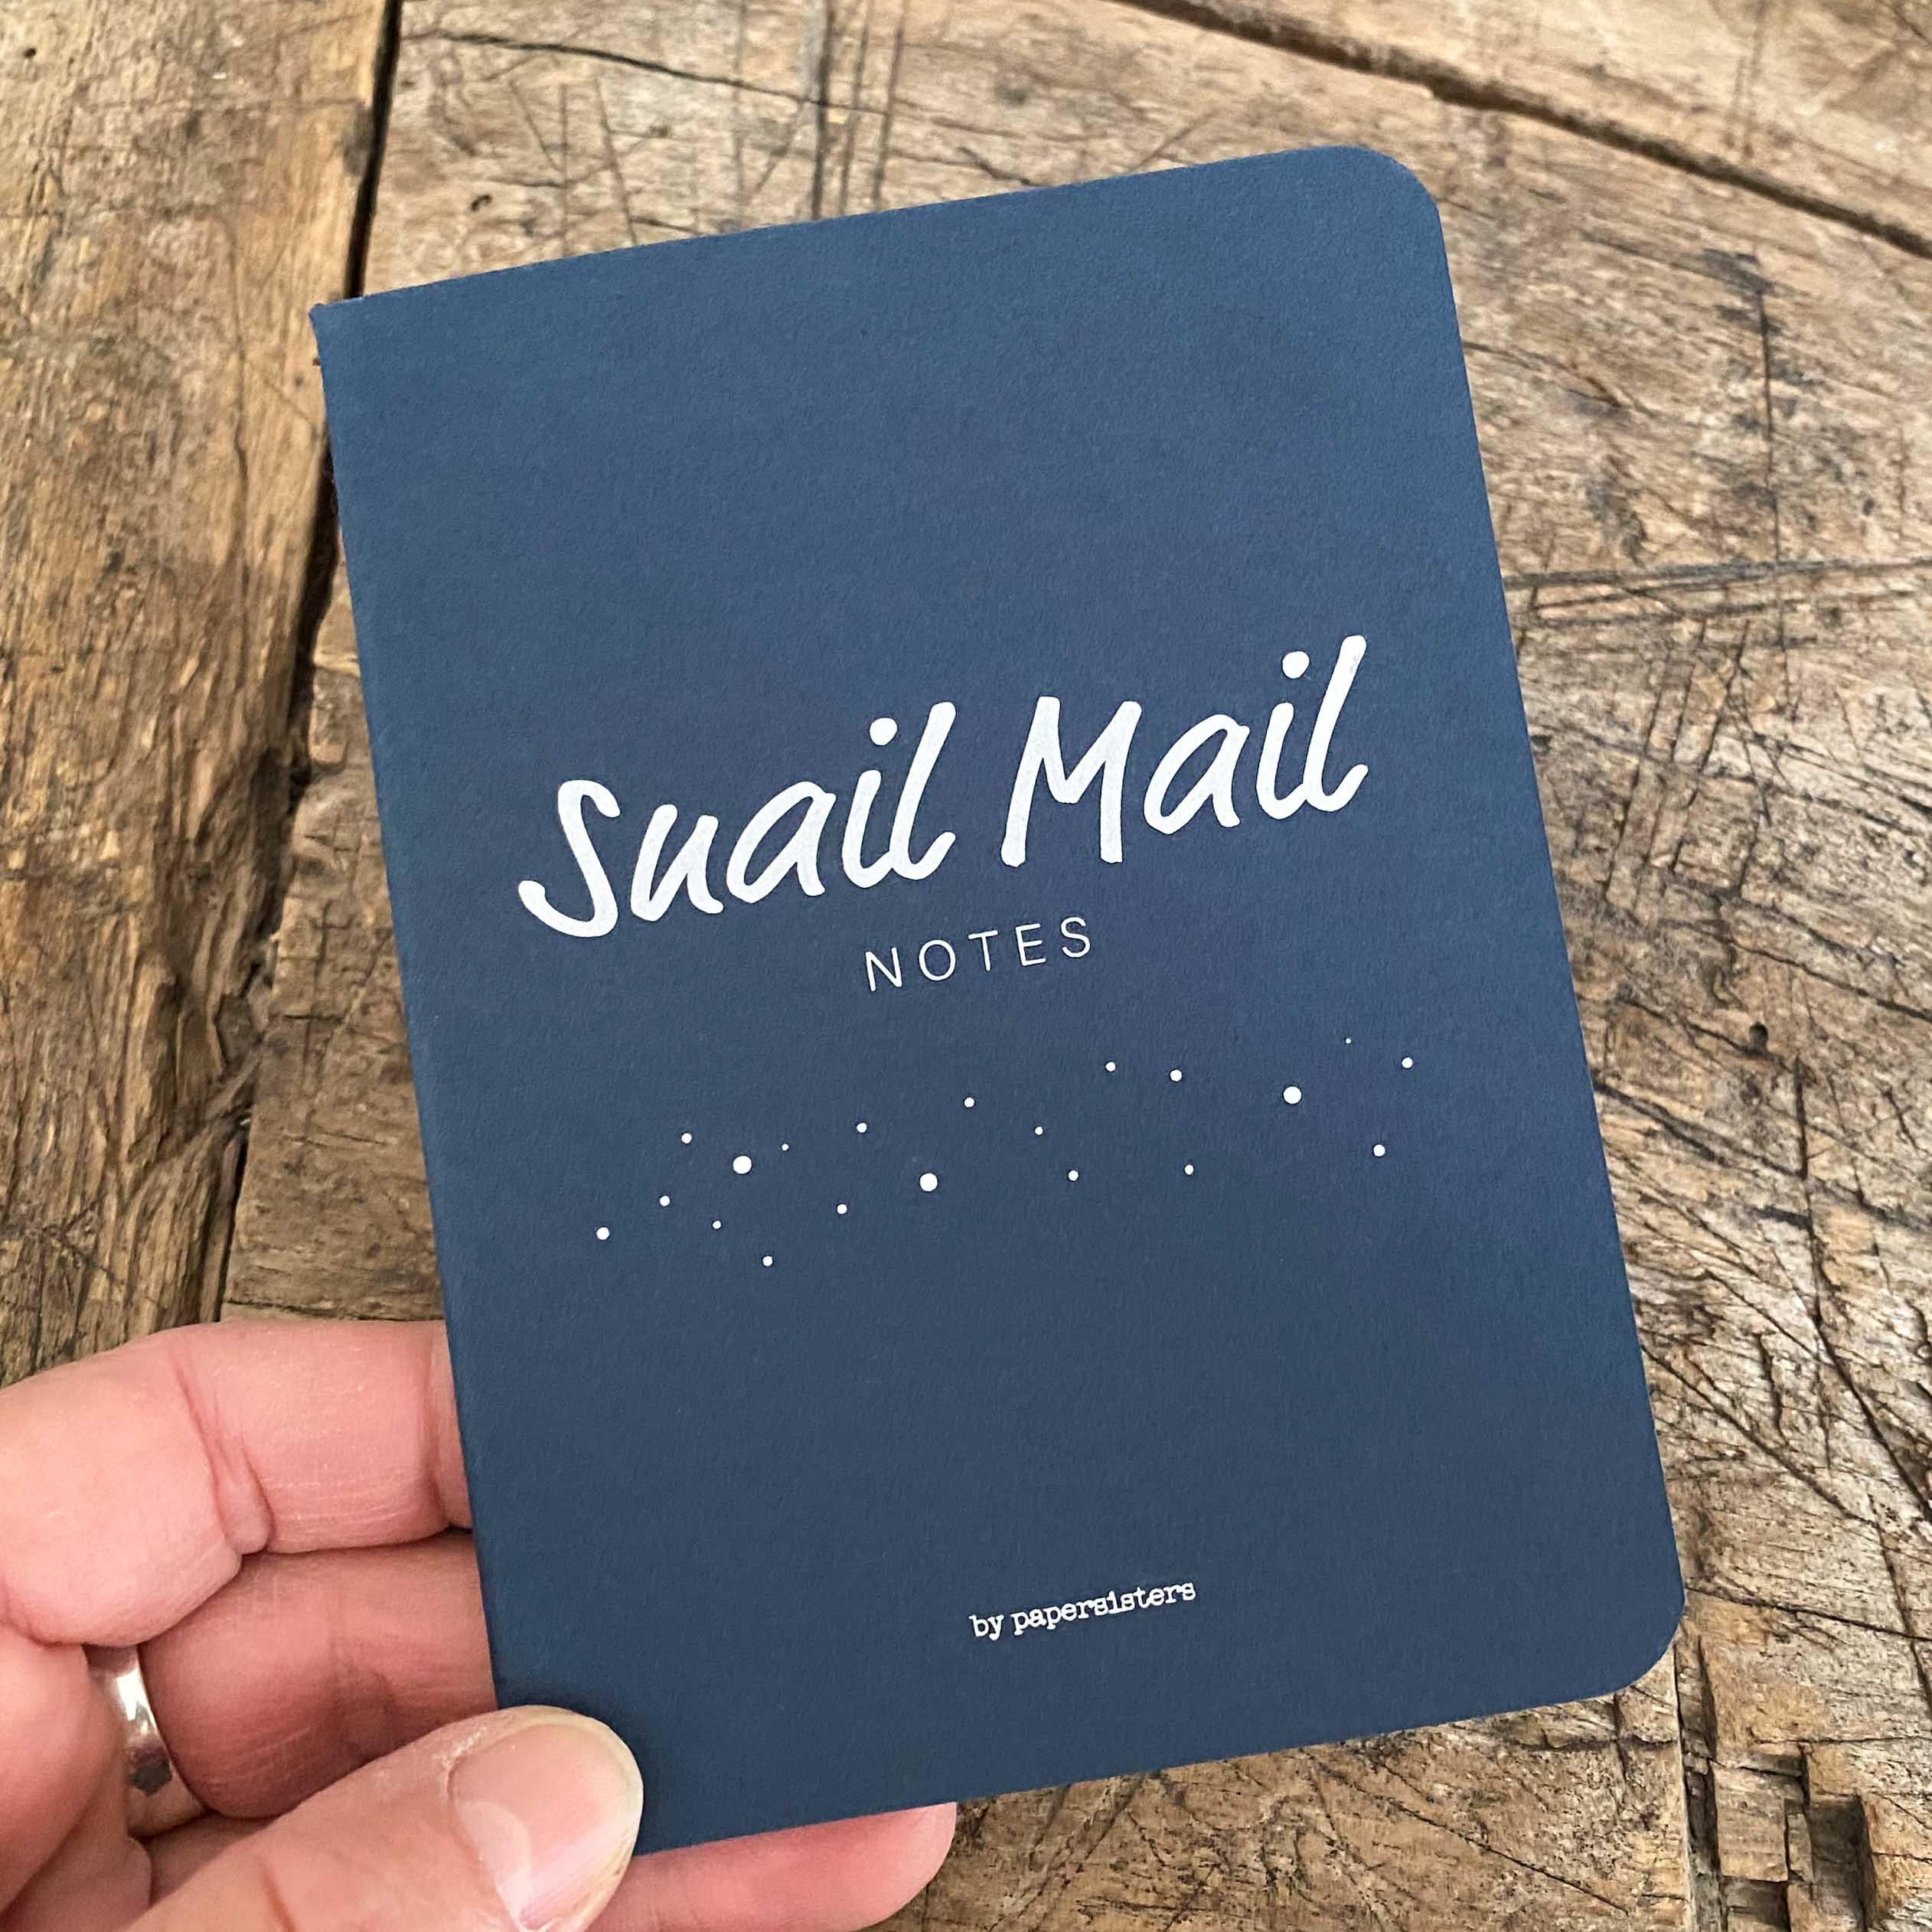 "Snail Mail Notes" Notebook by papersisters